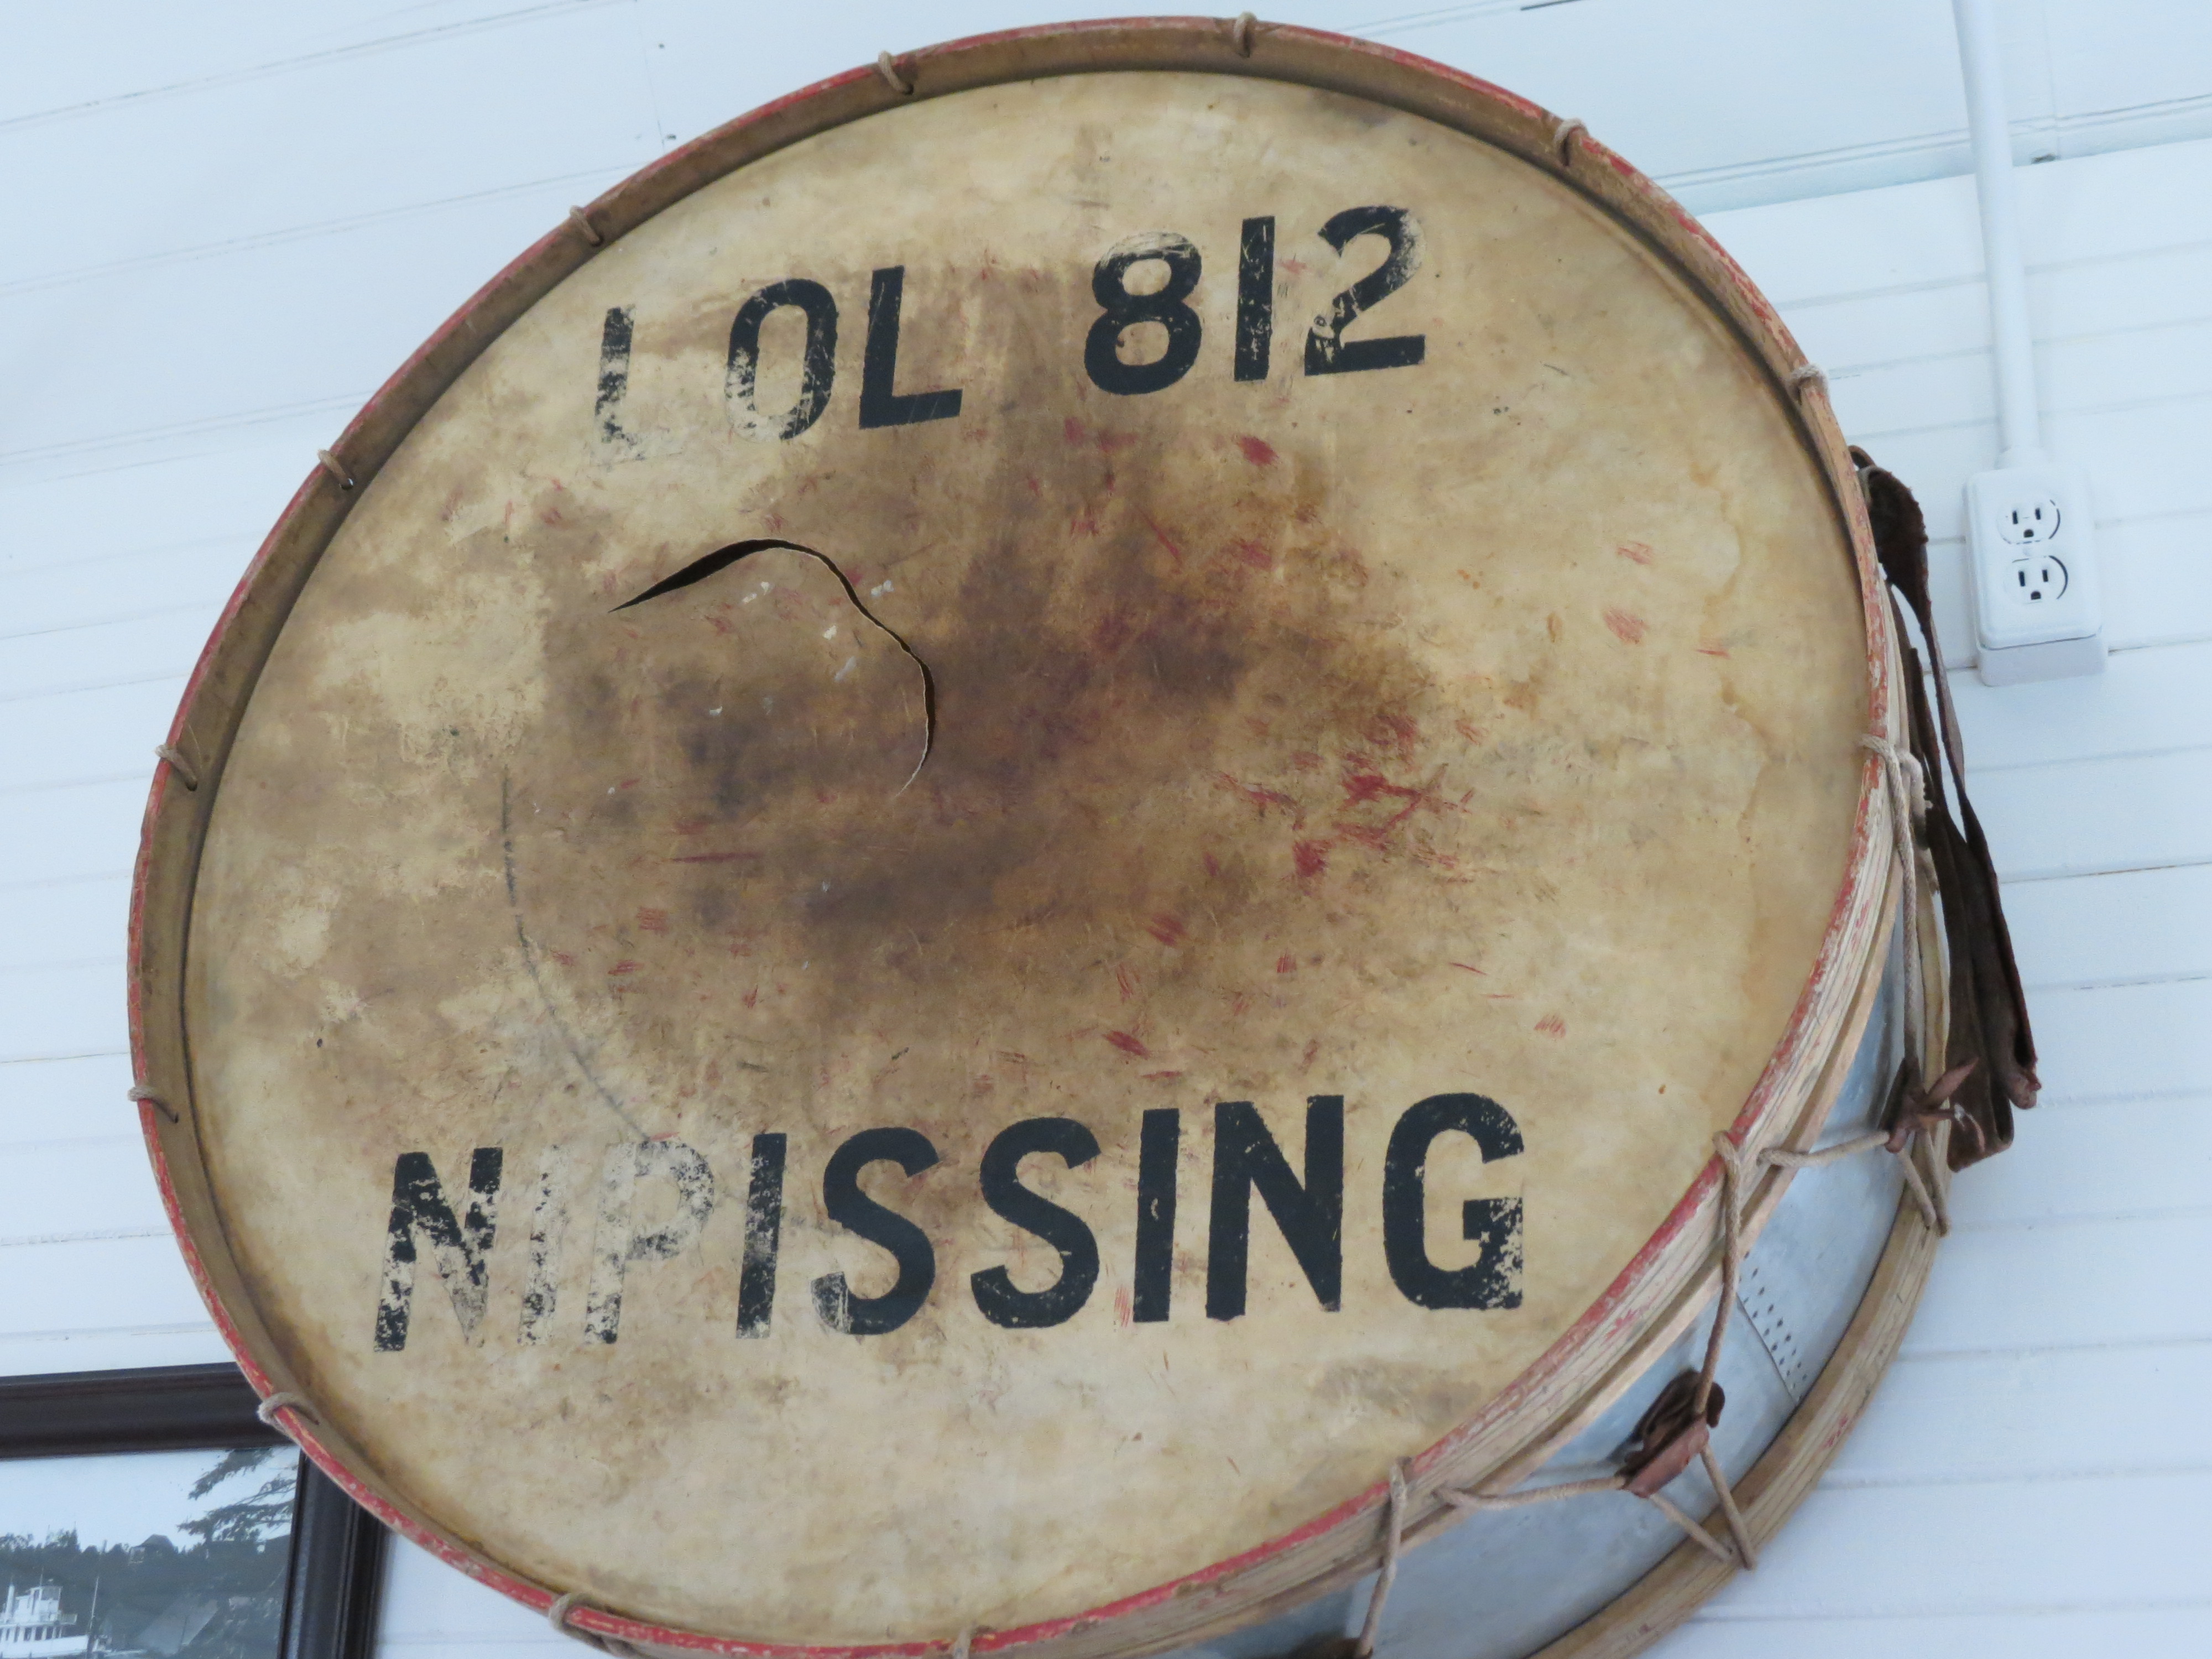 an antique drum on display at the Nipissing Township Museum, with the words "LOL 812 Nipissing" printed on the aged top skin.